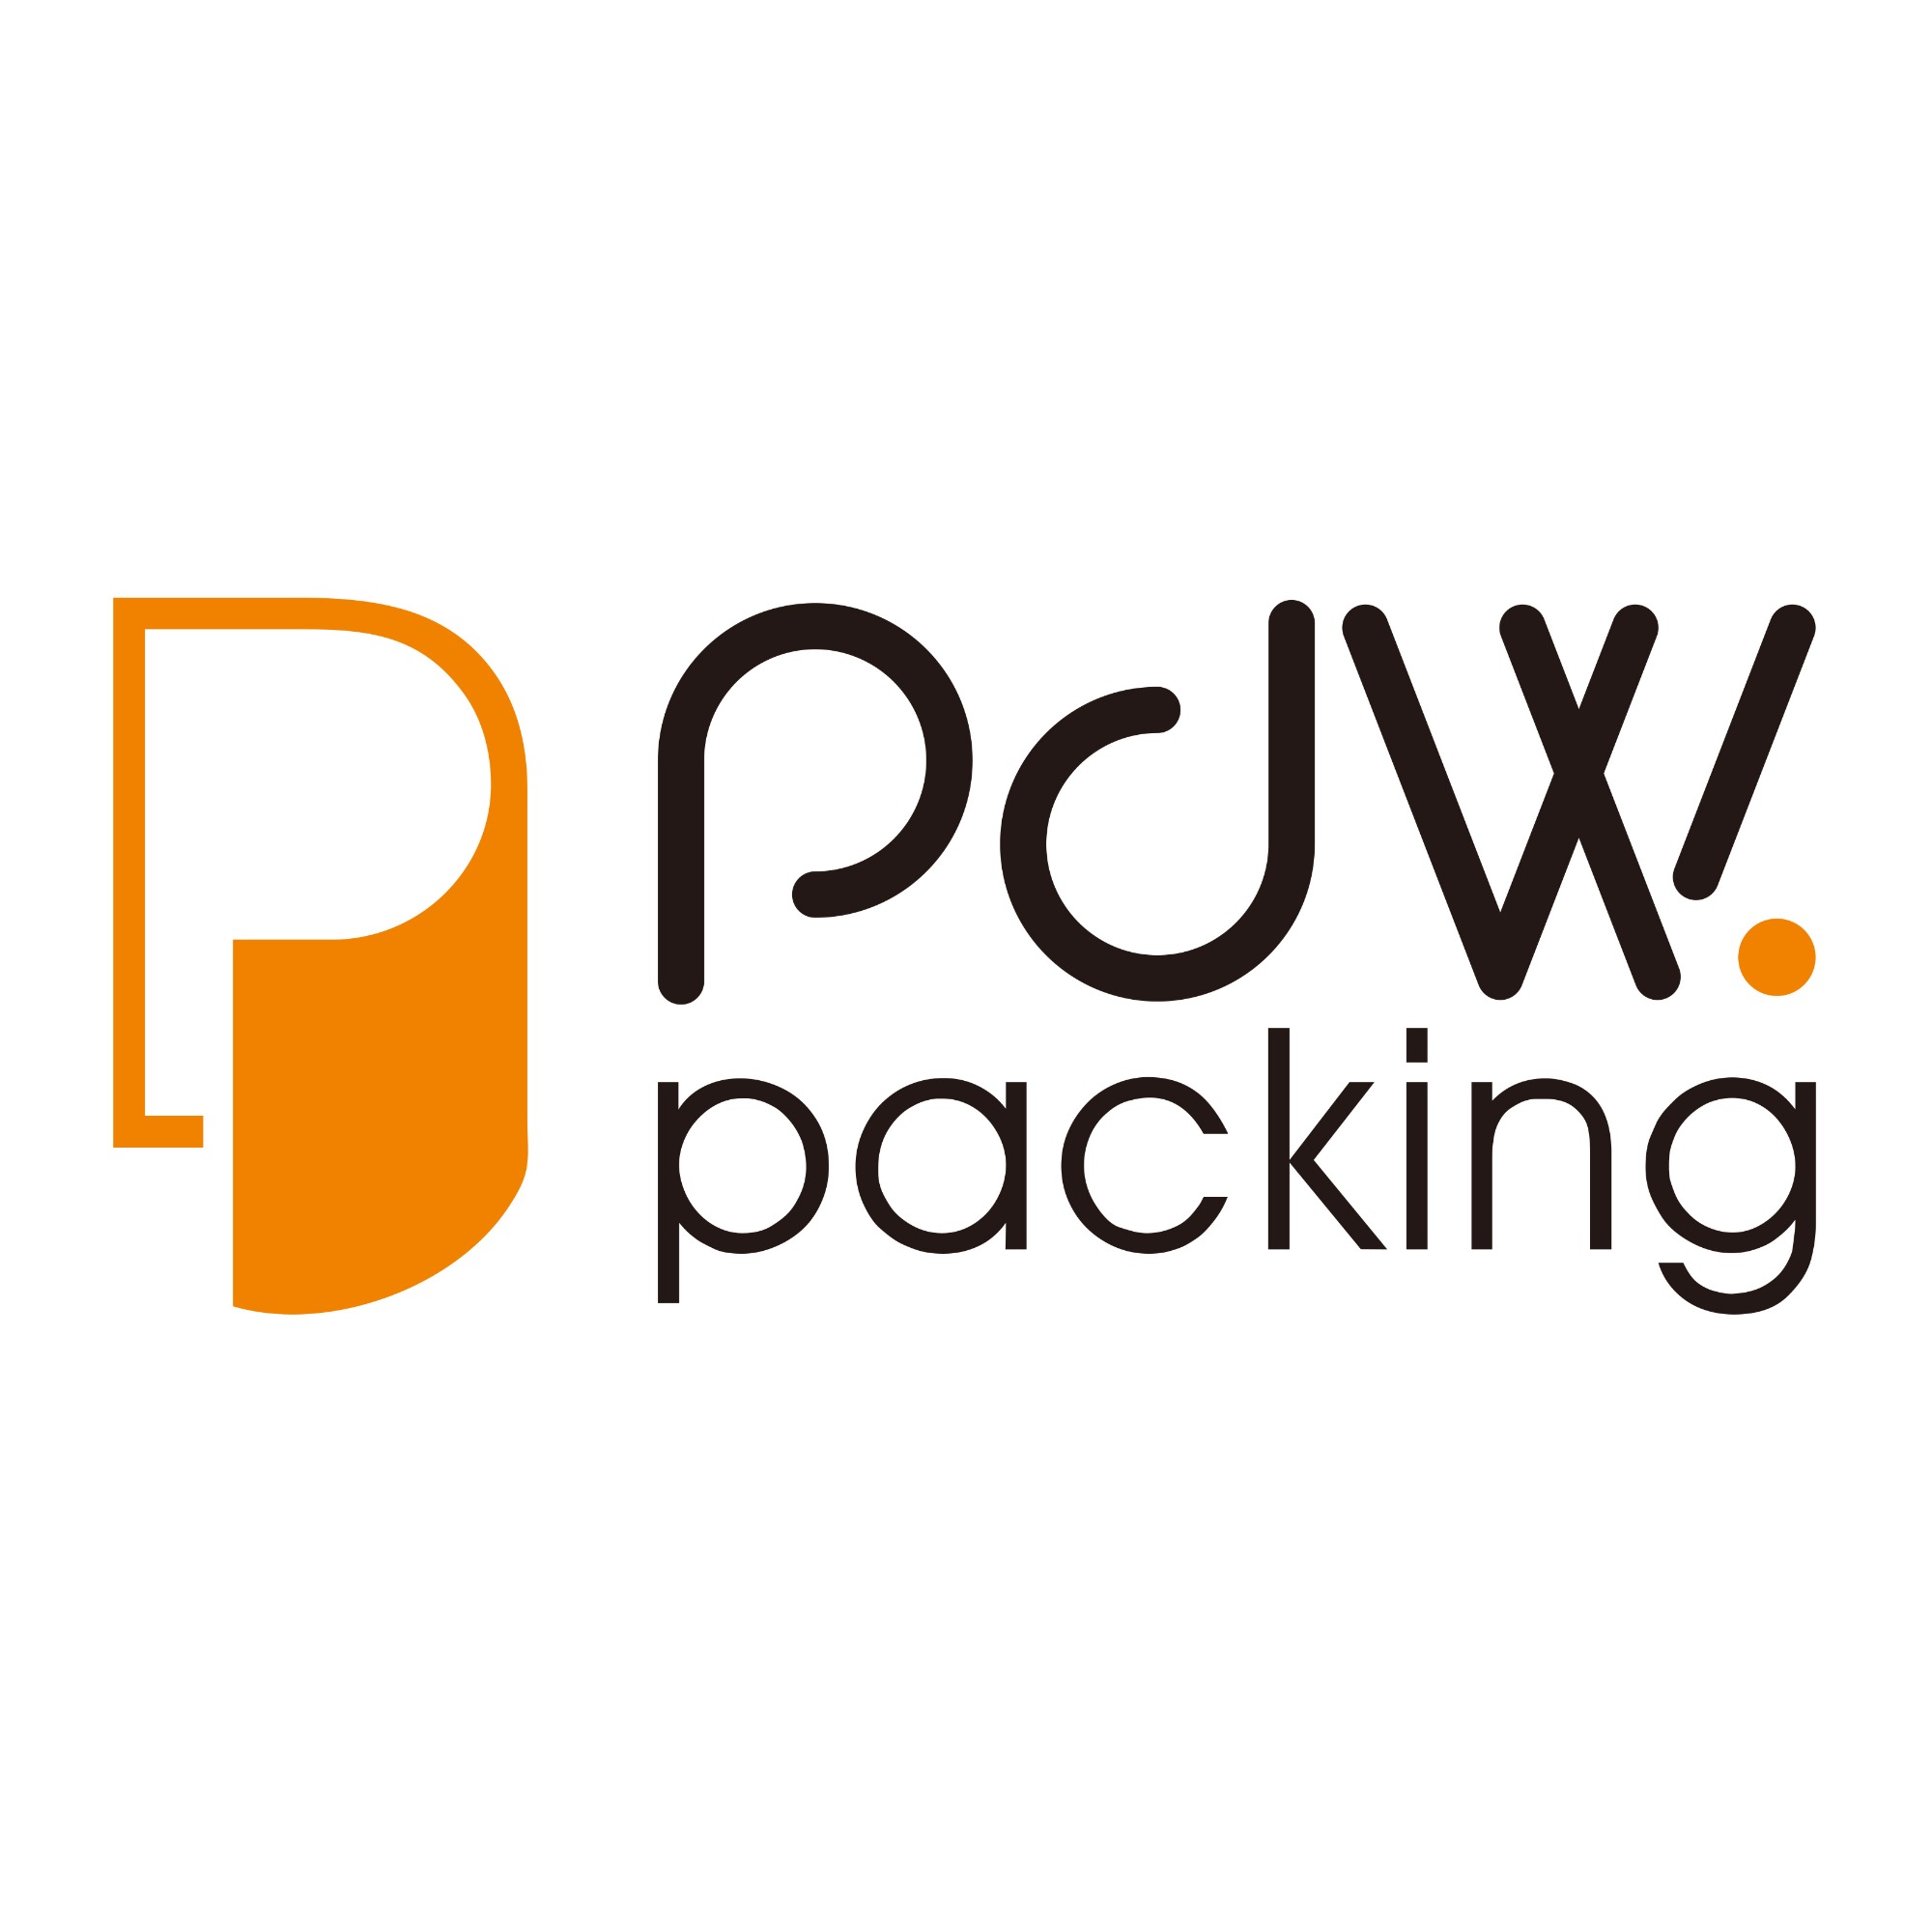 PDW packing update the logo